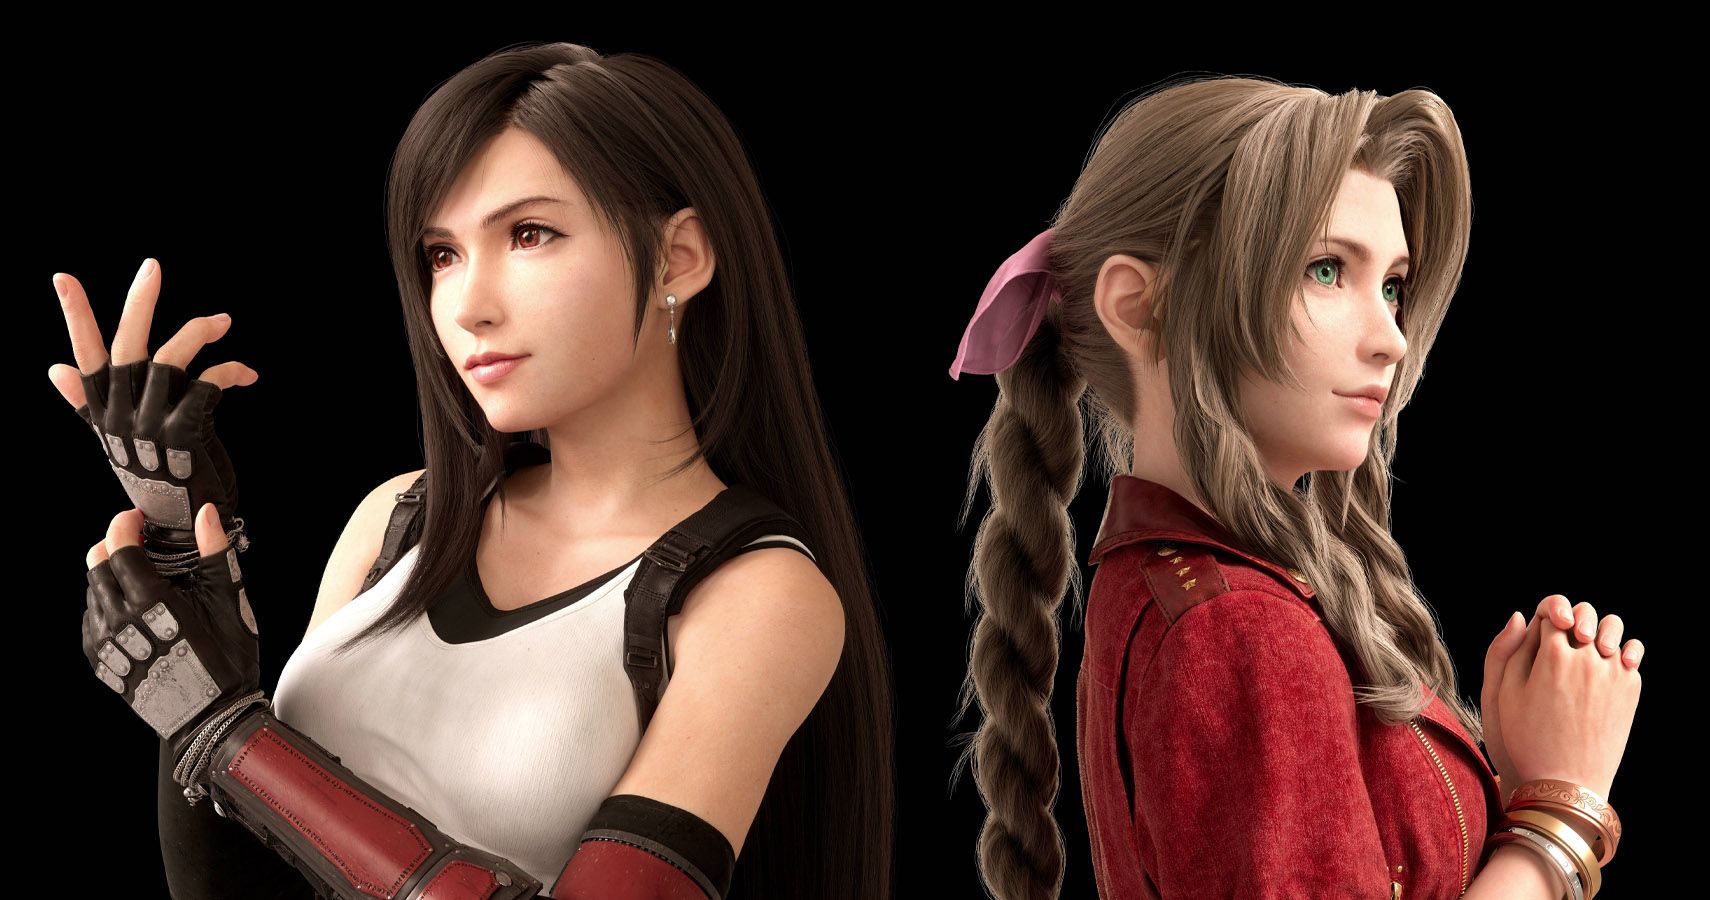 Final Fantasy VII Remakes Female Friendships Will Prove “Women Don’t Have To Tear Other Women Down”